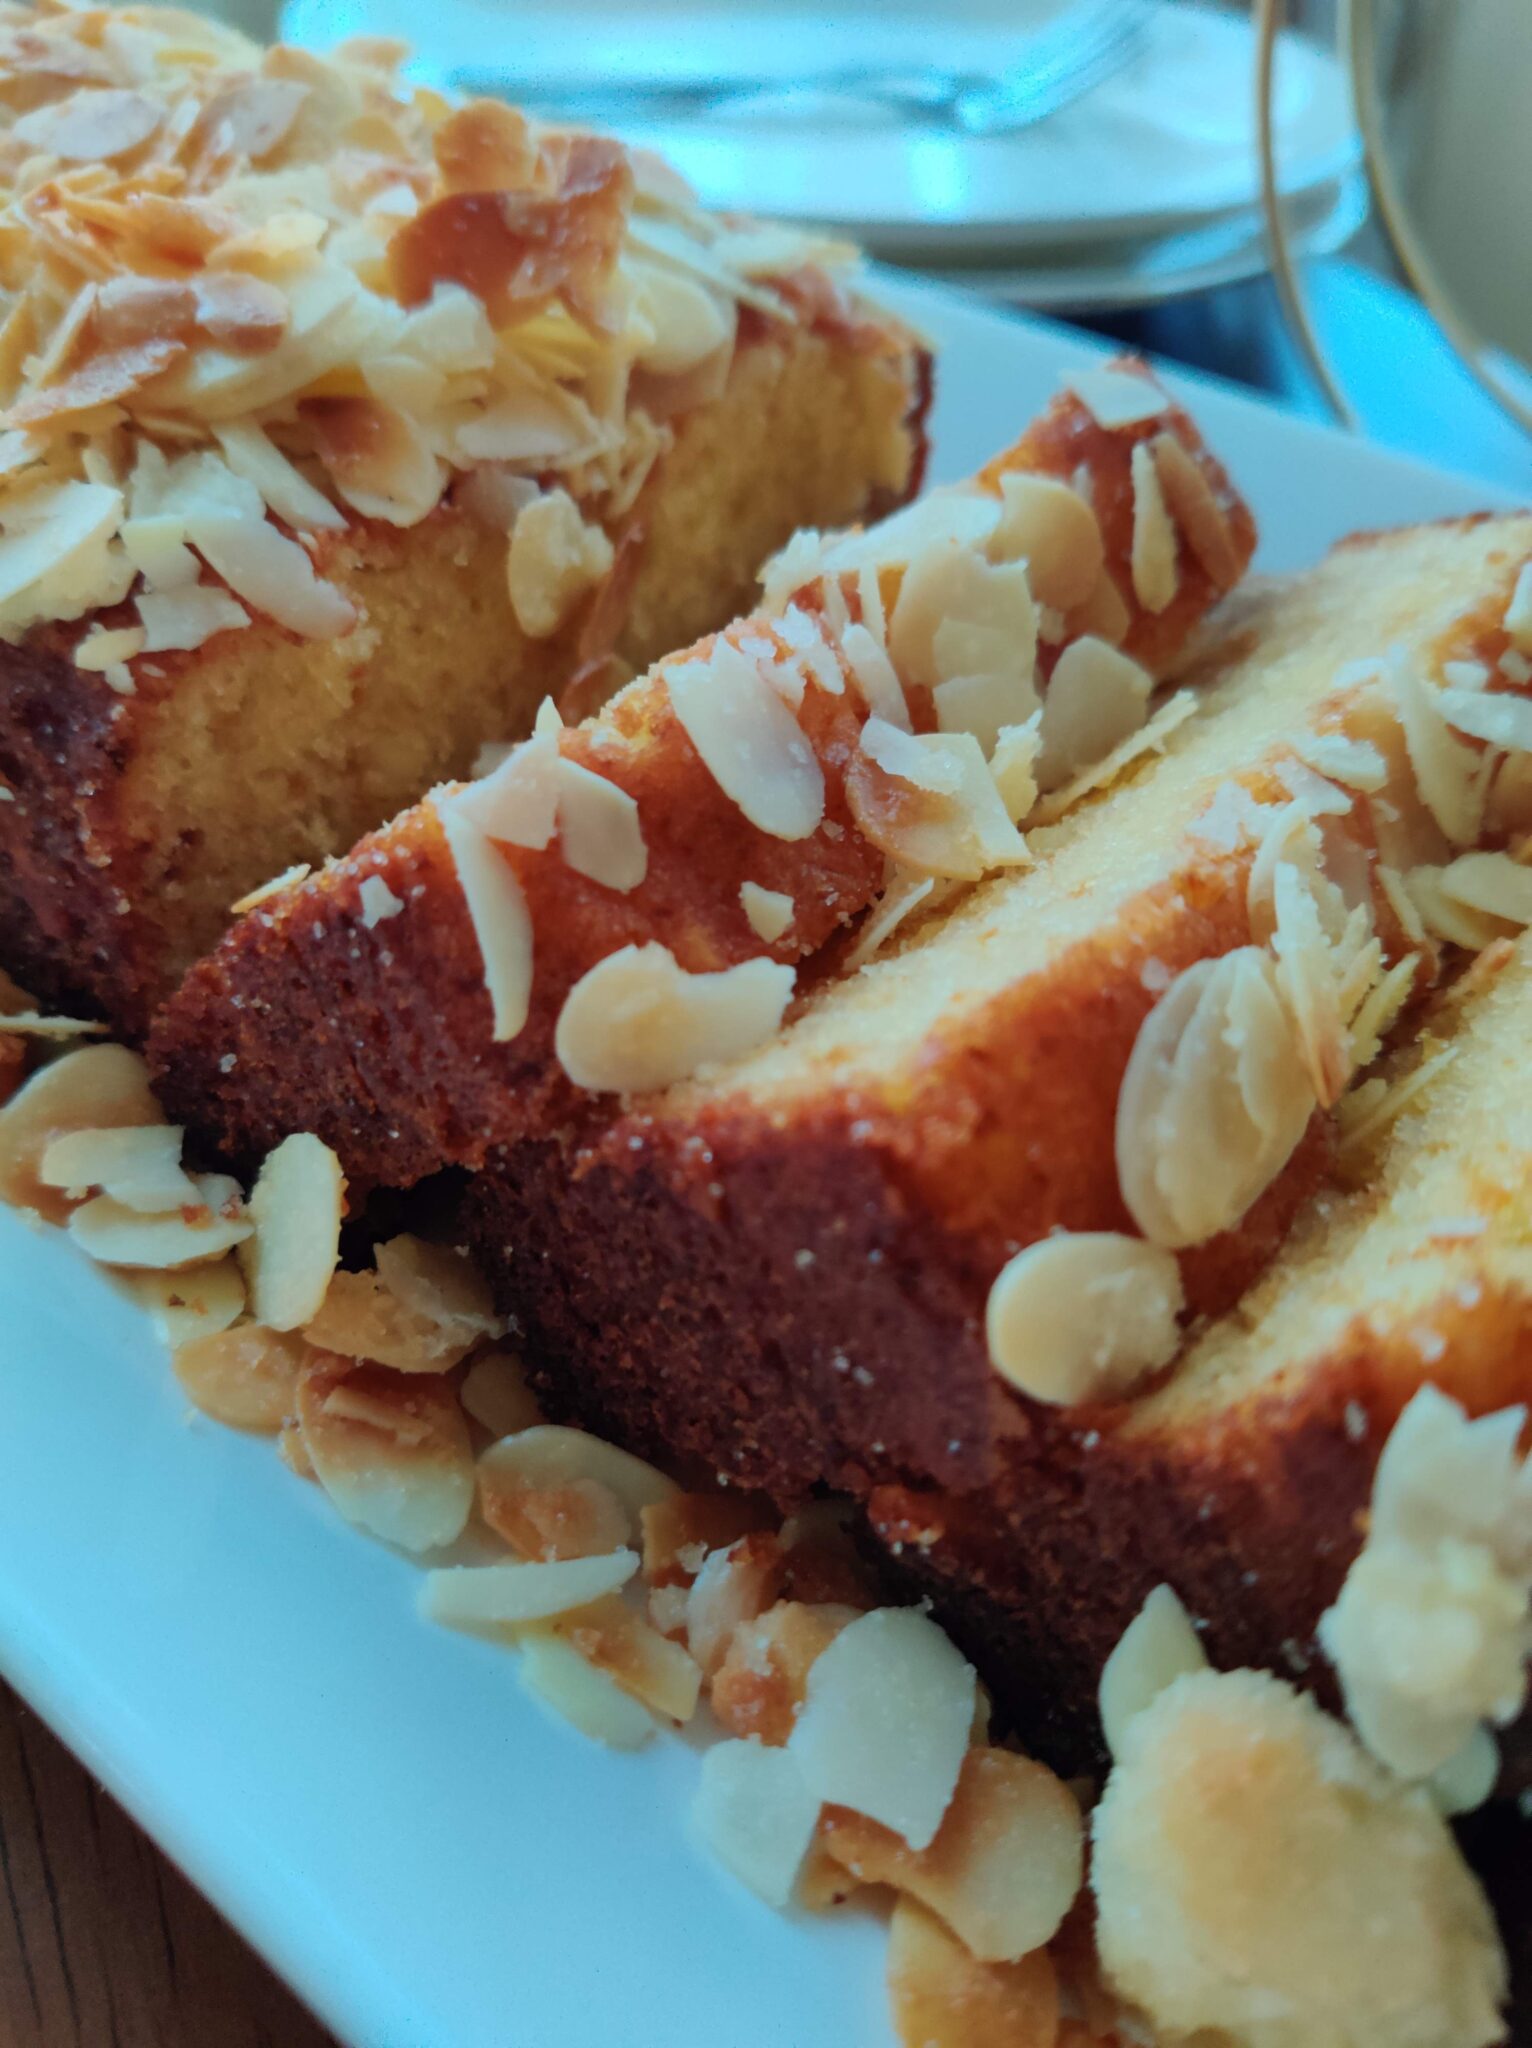 Bakery Style Almond Cake With Toasted Almond Flakes - The Ovenist